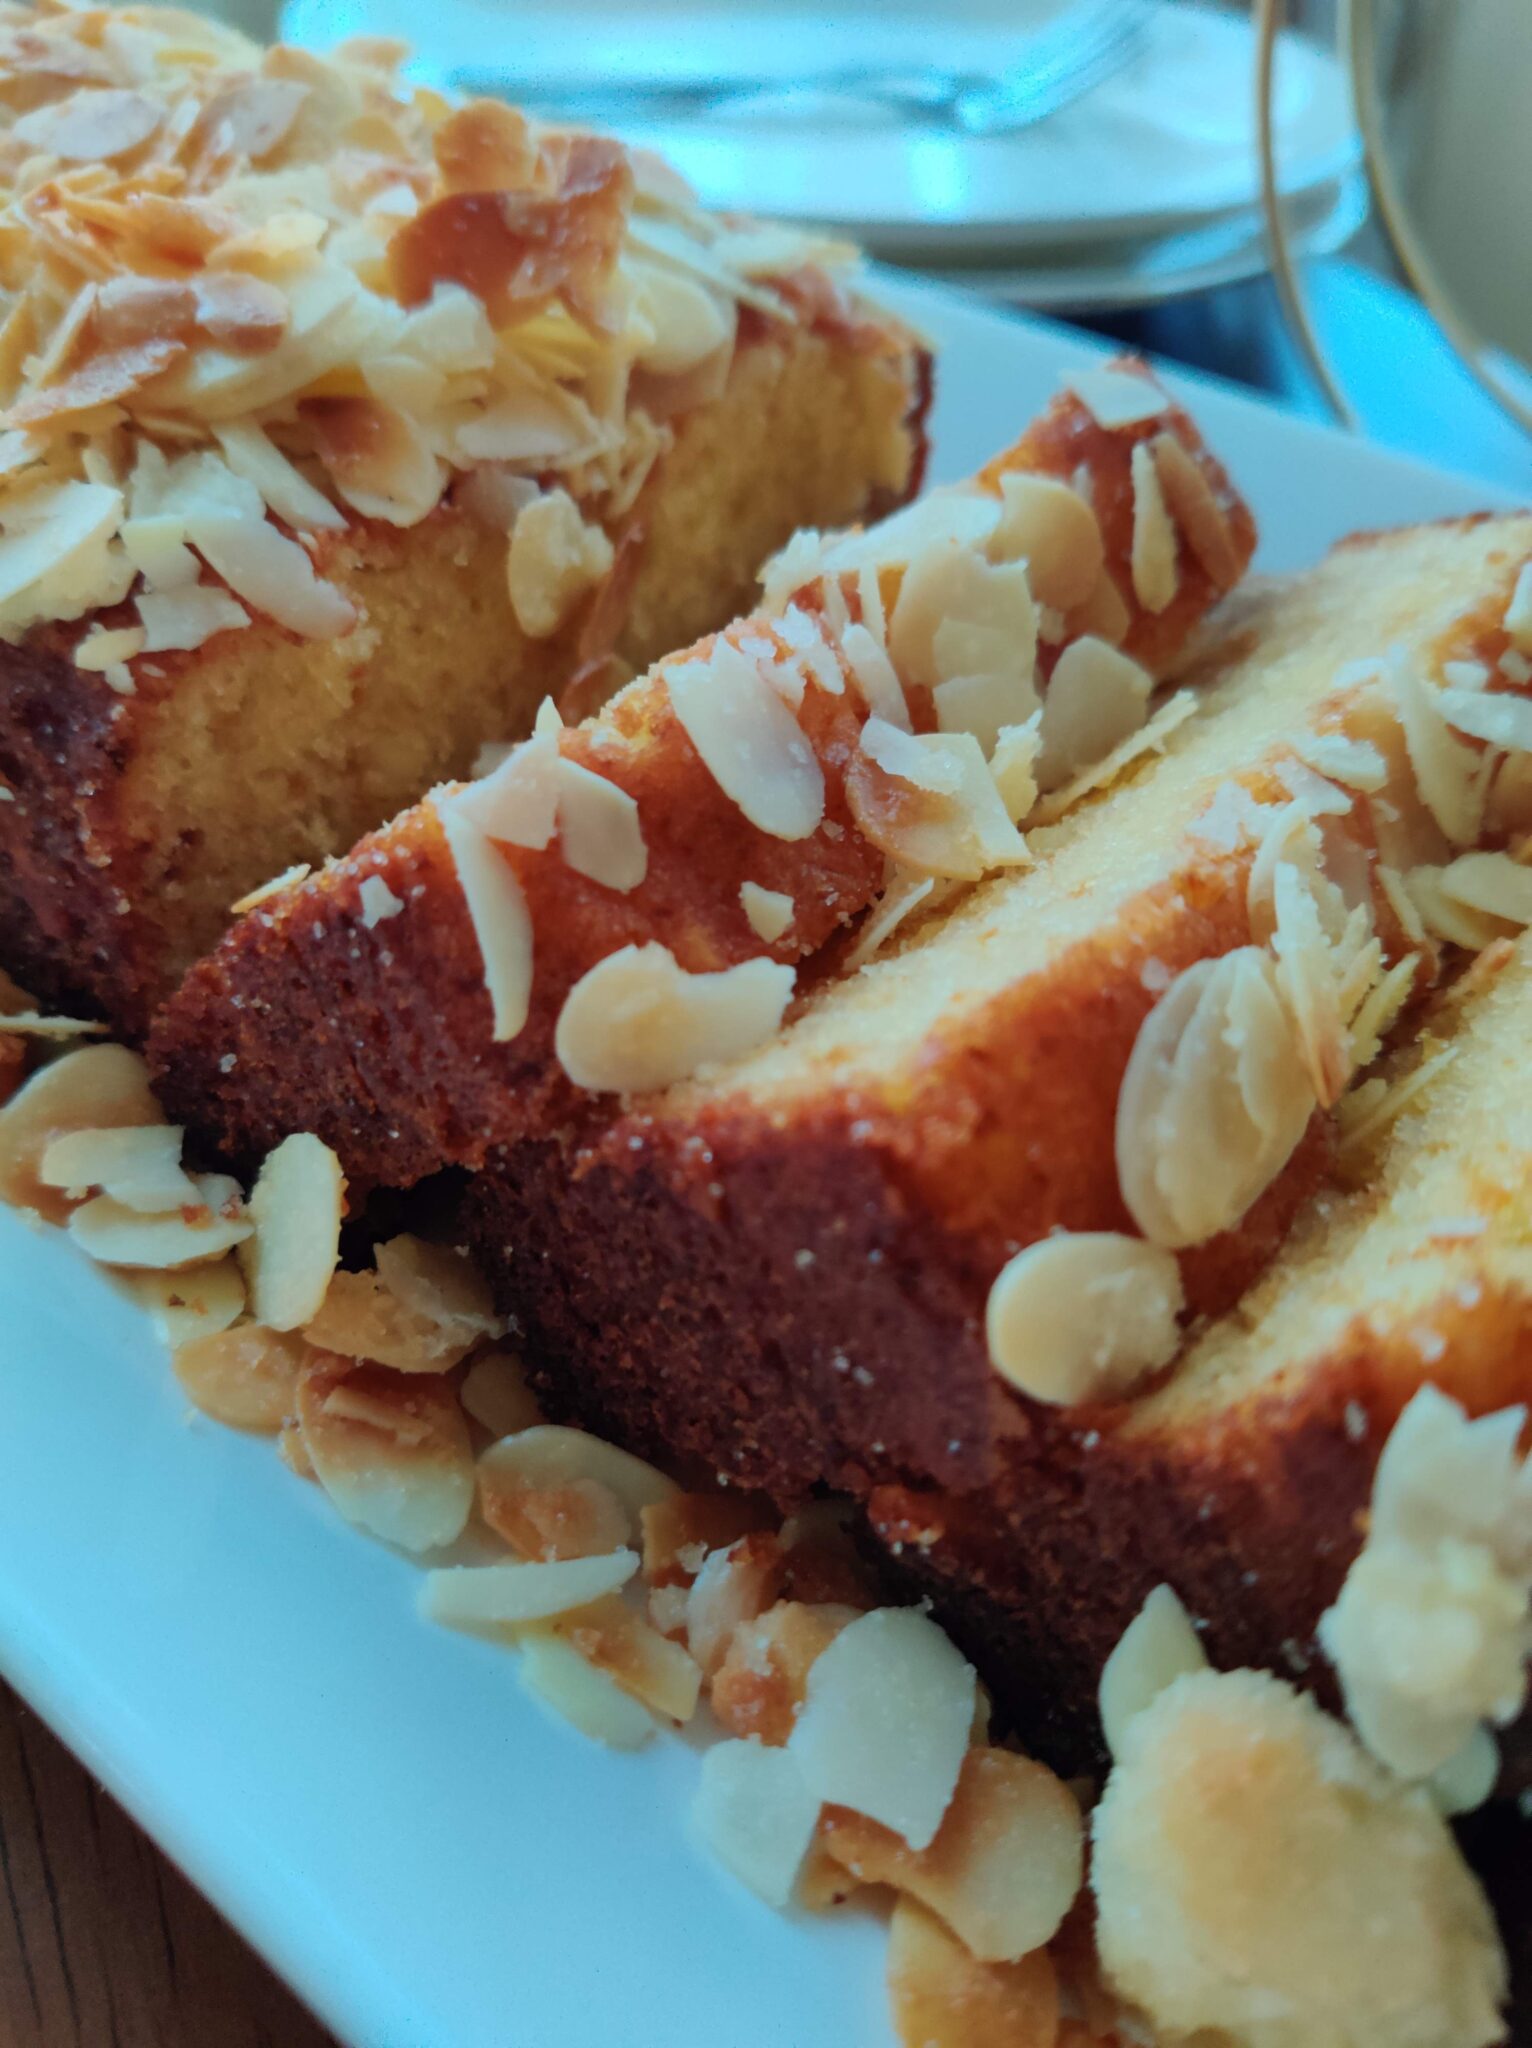 Bakery Style Almond Cake With Toasted Almond Flakes - The Ovenist